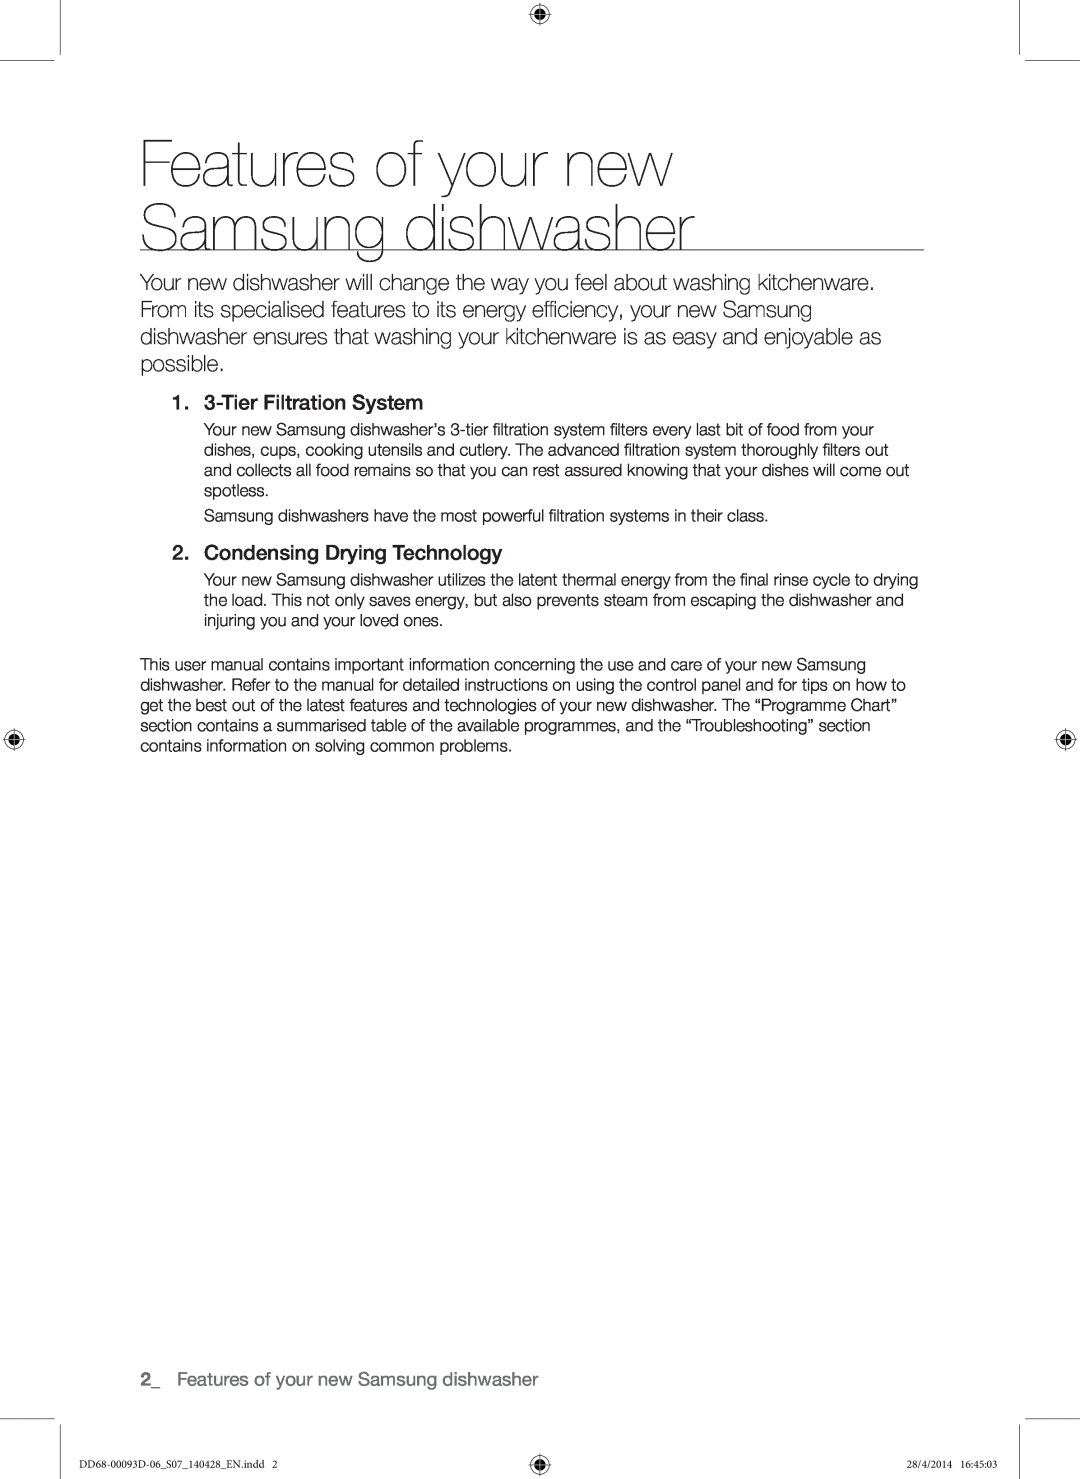 Samsung DW60H700FEW/TR Features of your new Samsung dishwasher, 1. 3-Tier Filtration System, Condensing Drying Technology 